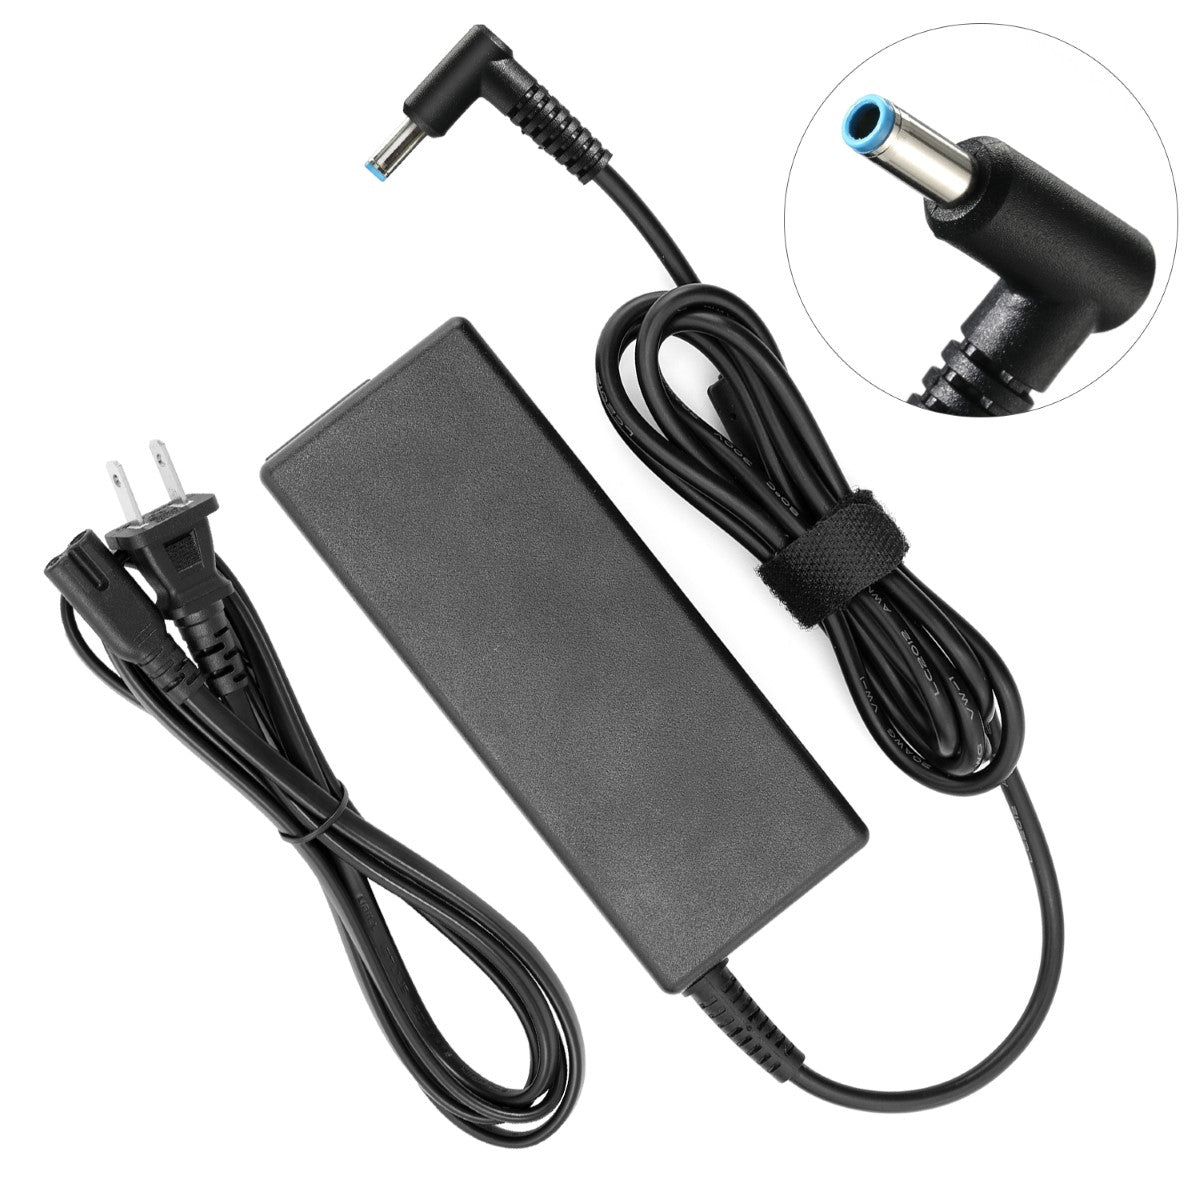 AC Adapter Charger for HP Envy TouchSmart m7-j000 Notebook.